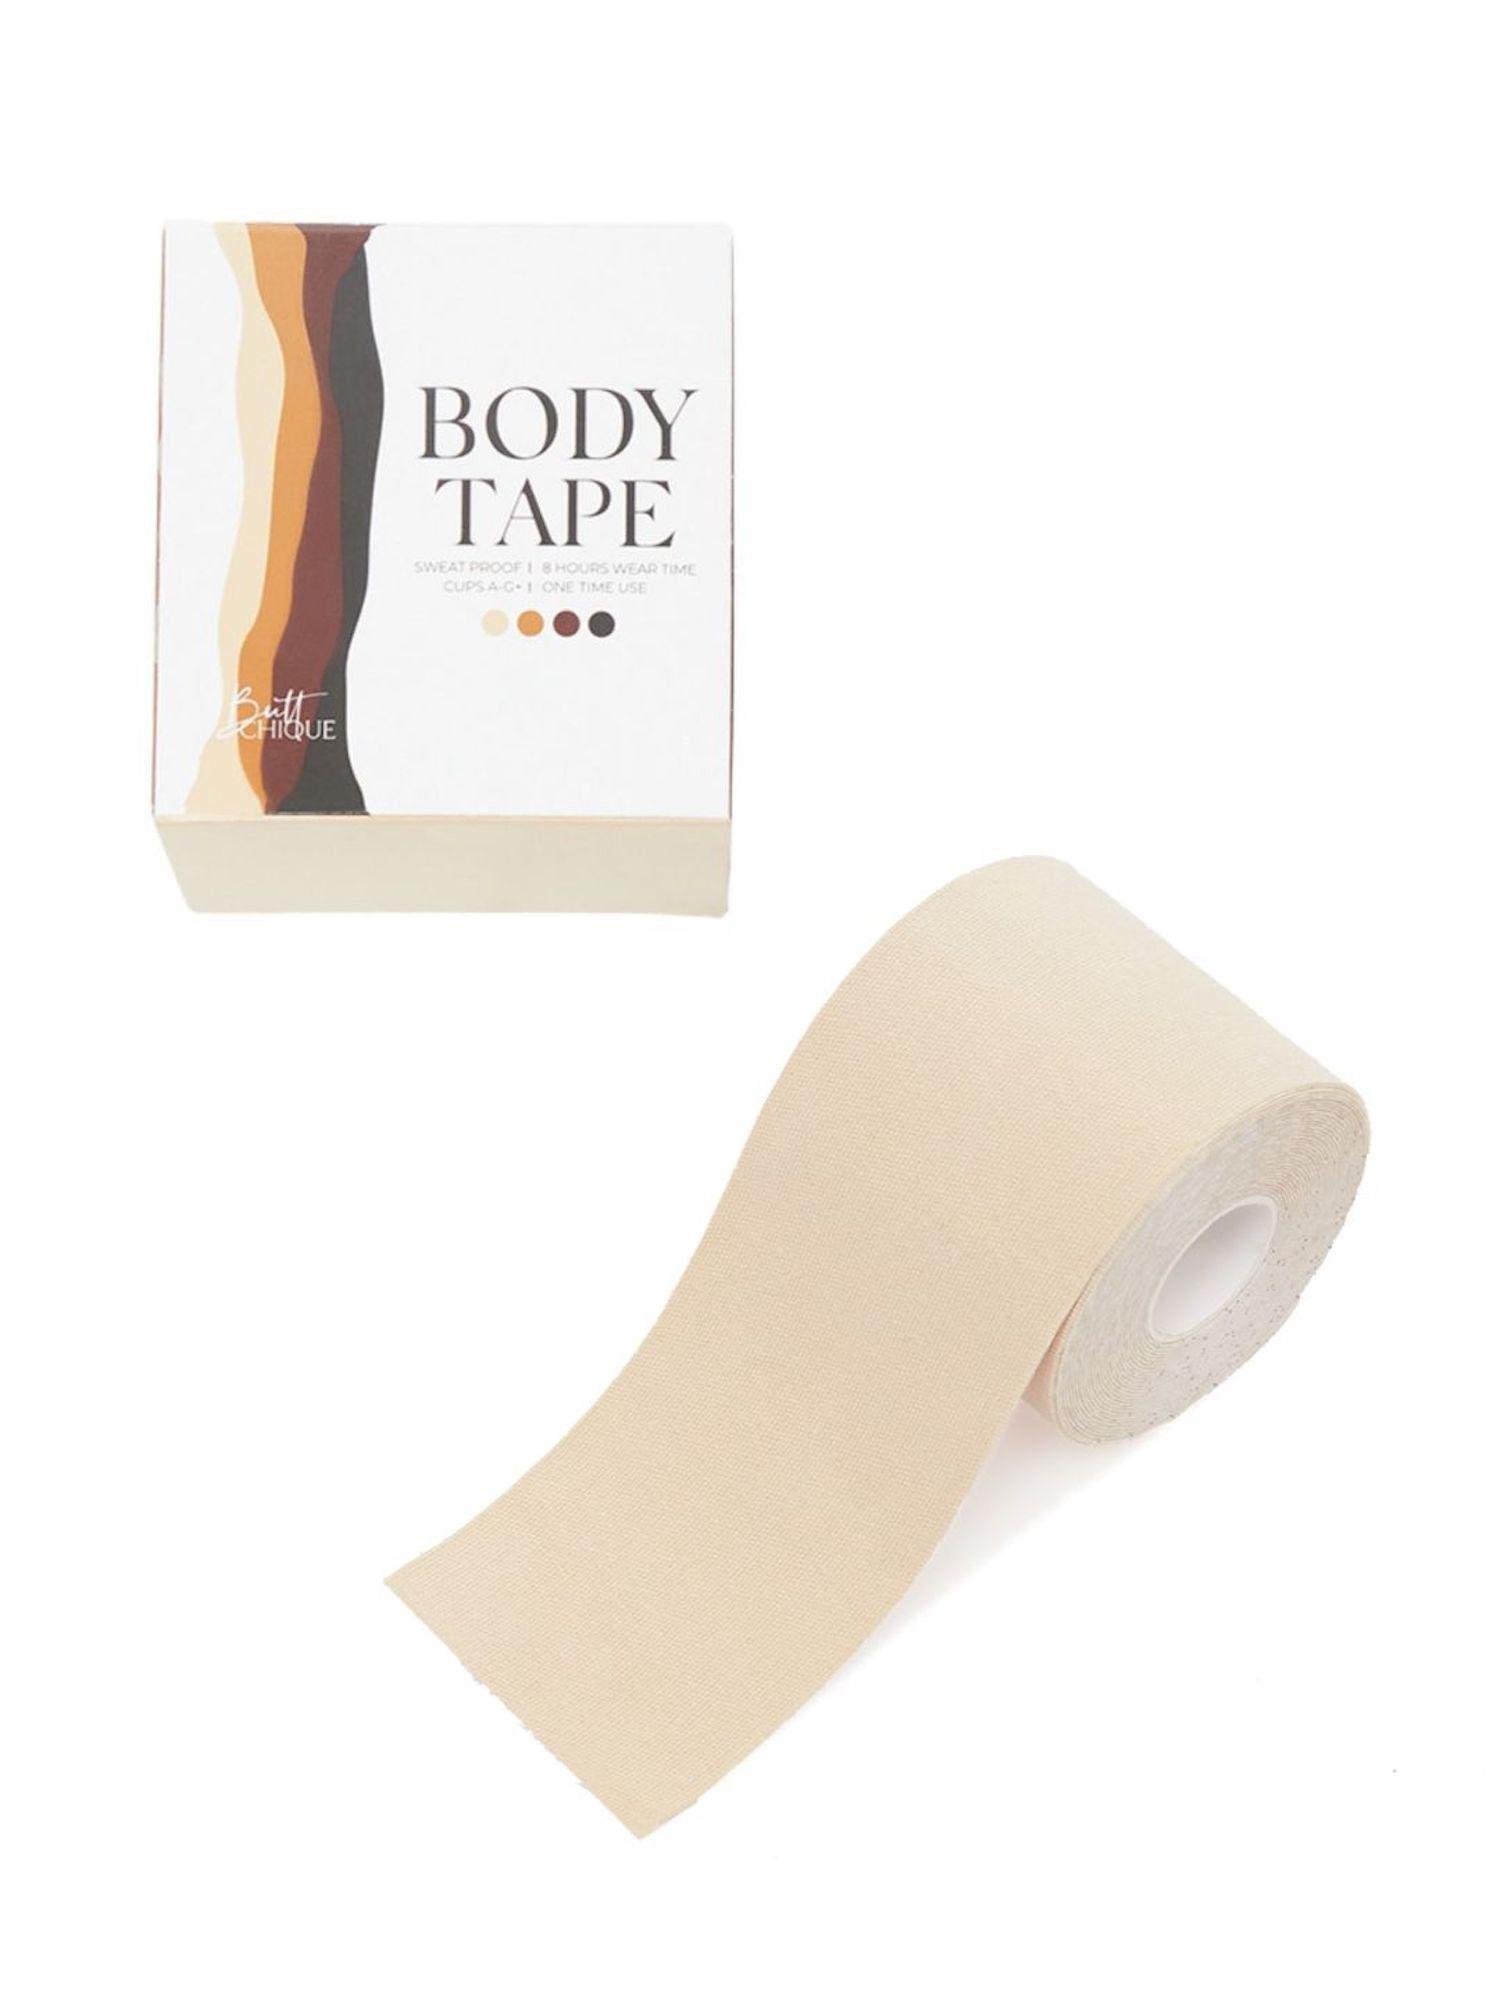 sand body tape 5 meter roll, lifts your breasts & lasts upto 8-10 hours